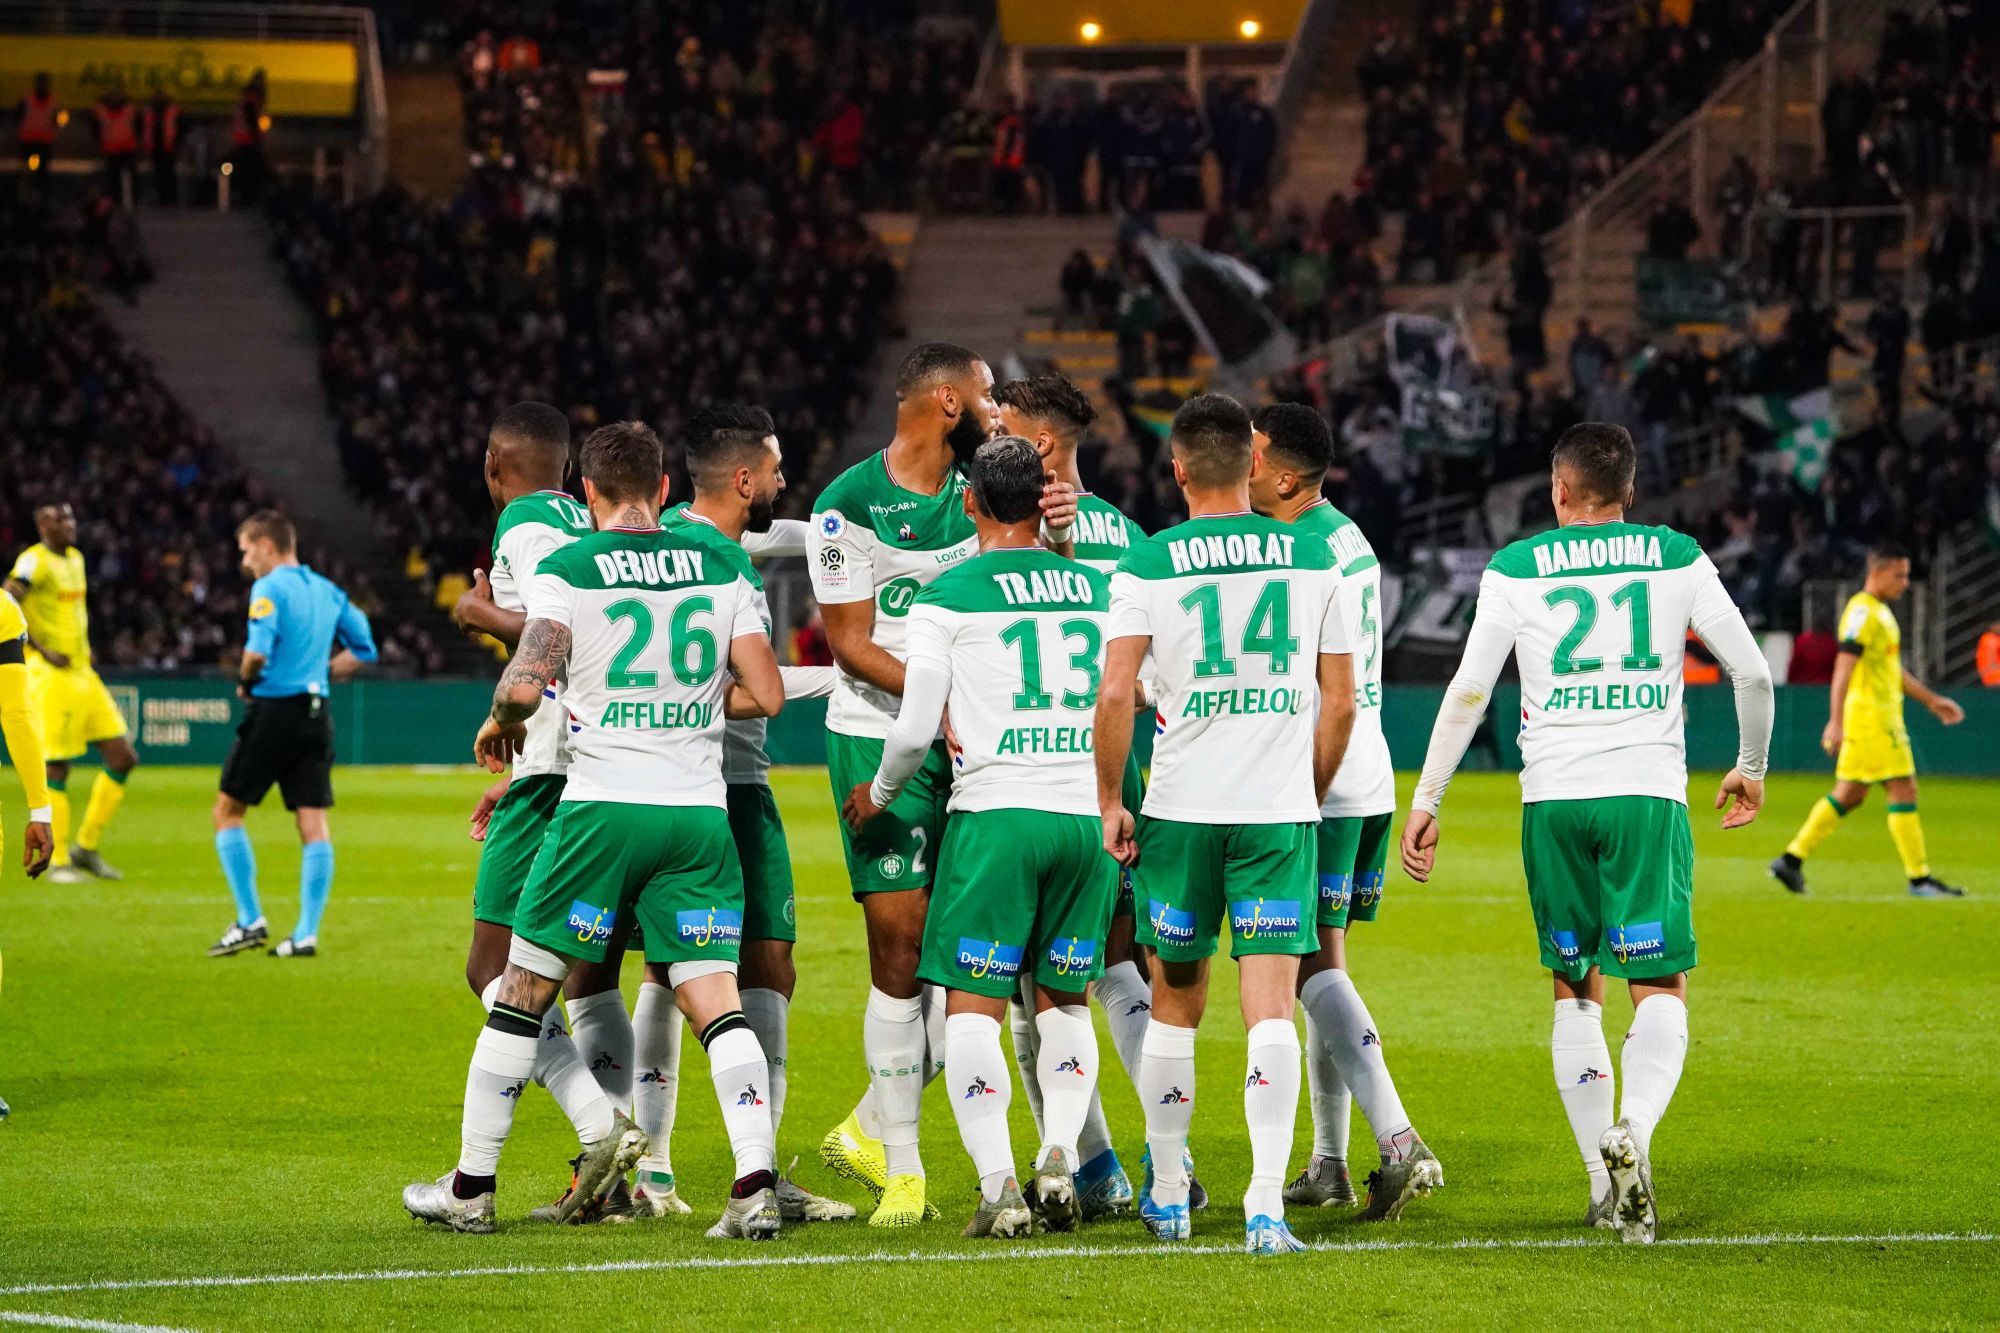 Players of Saint Etienne celebrates after scoring a goal during the Ligue 1 match between Nantes and Saint Etienne at Stade de la Beaujoire on November 10, 2019 in Nantes, France. (Photo by Eddy Lemaistre/Icon Sport) - --- - Stade de La Beaujoire - Louis Fonteneau - Nantes (France)